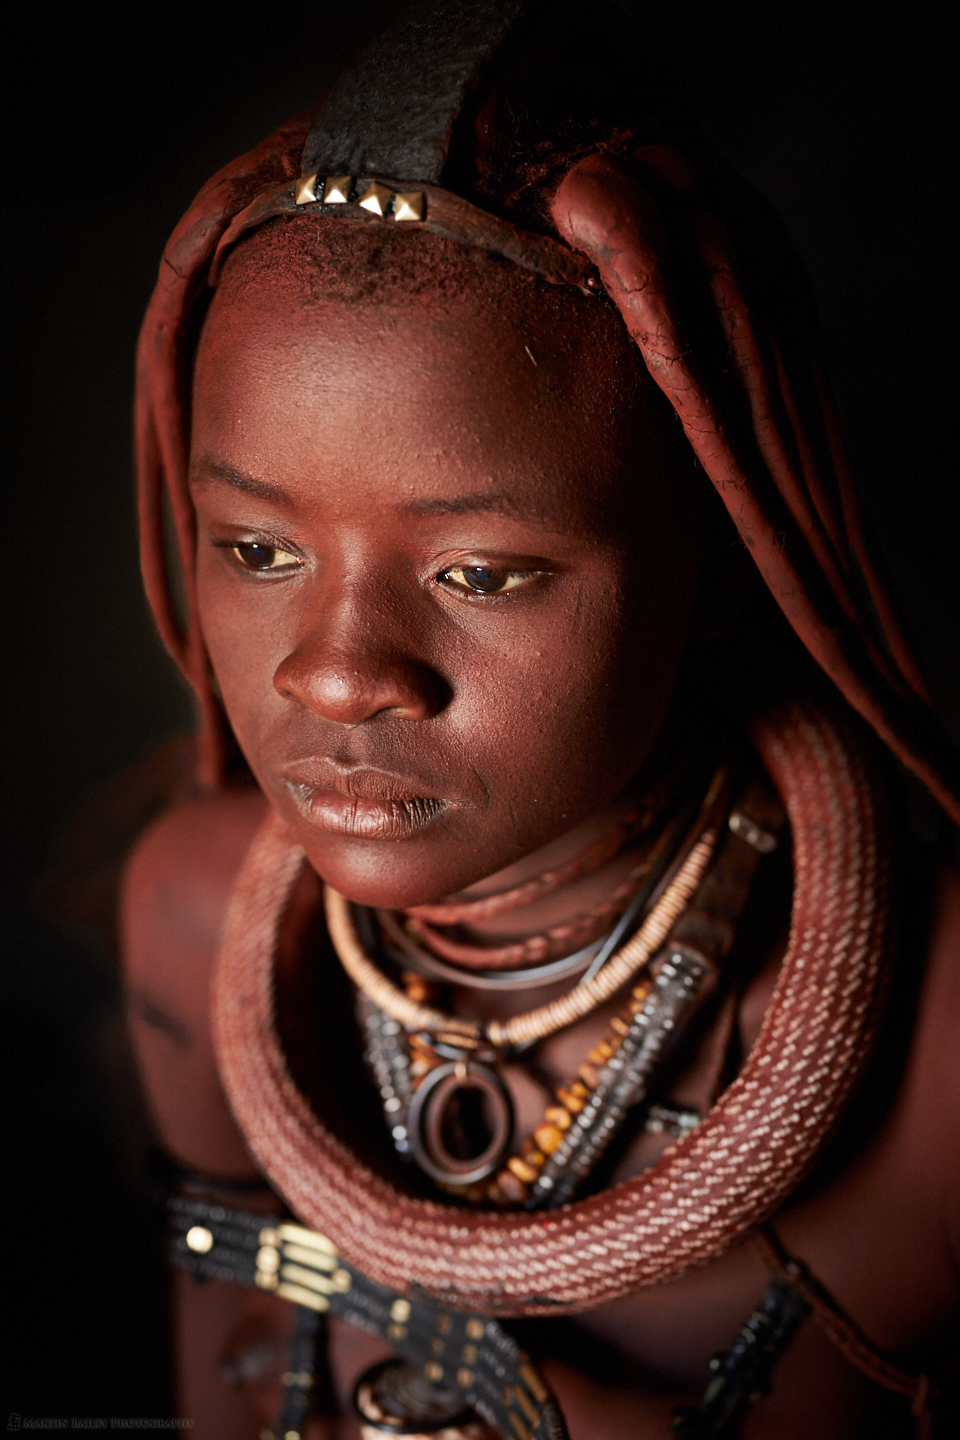 A young Himba lady caught in a moment of thought